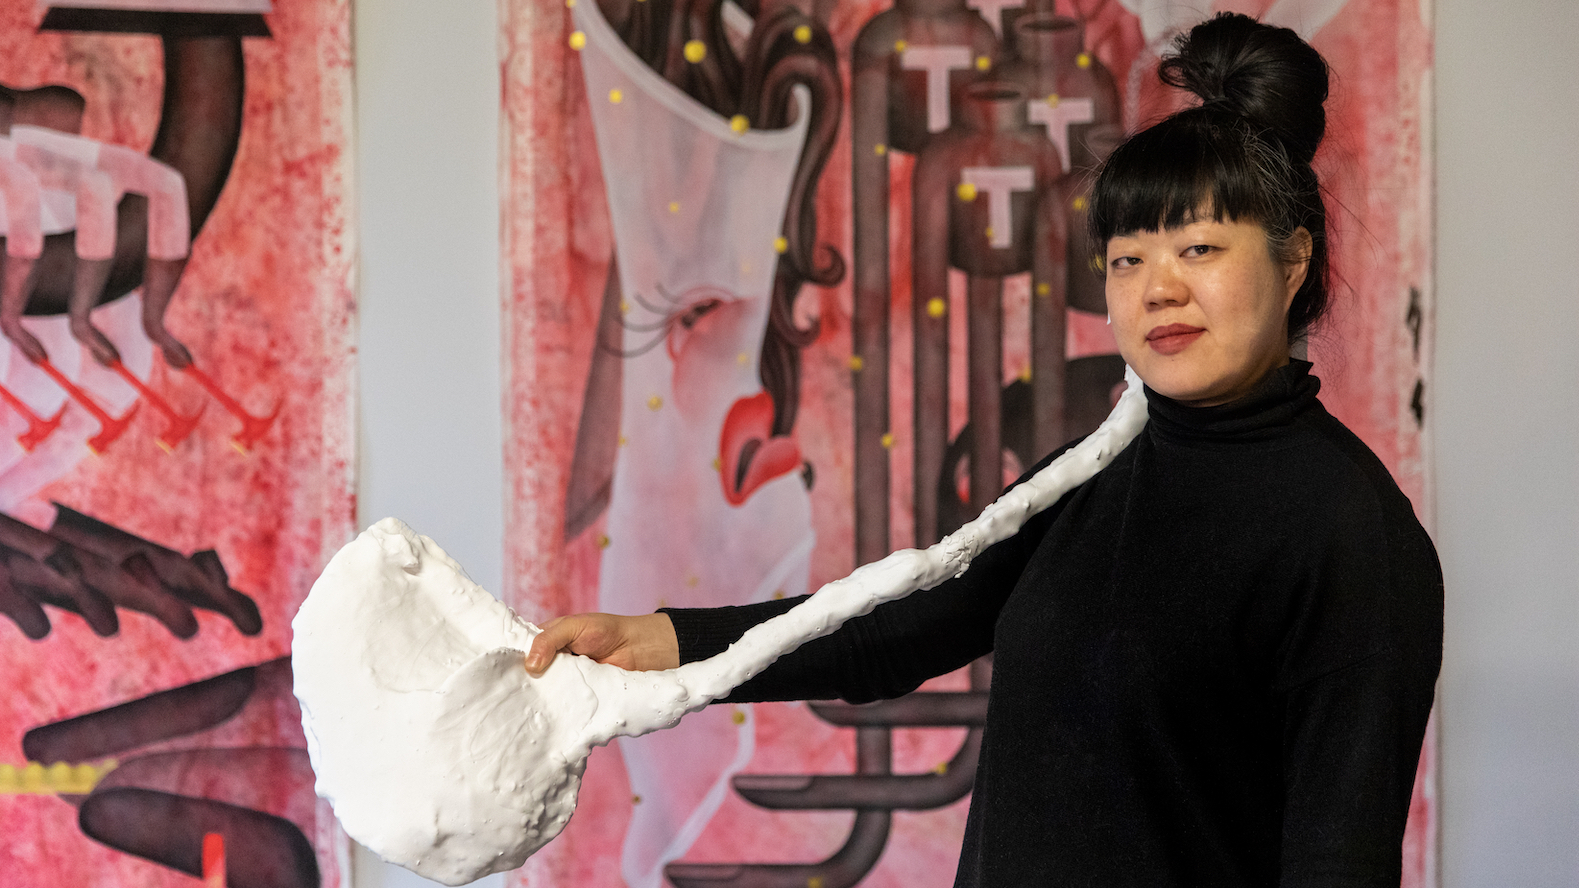 Artist Jen Liu stands in front of a pink and white background holding a long white object.